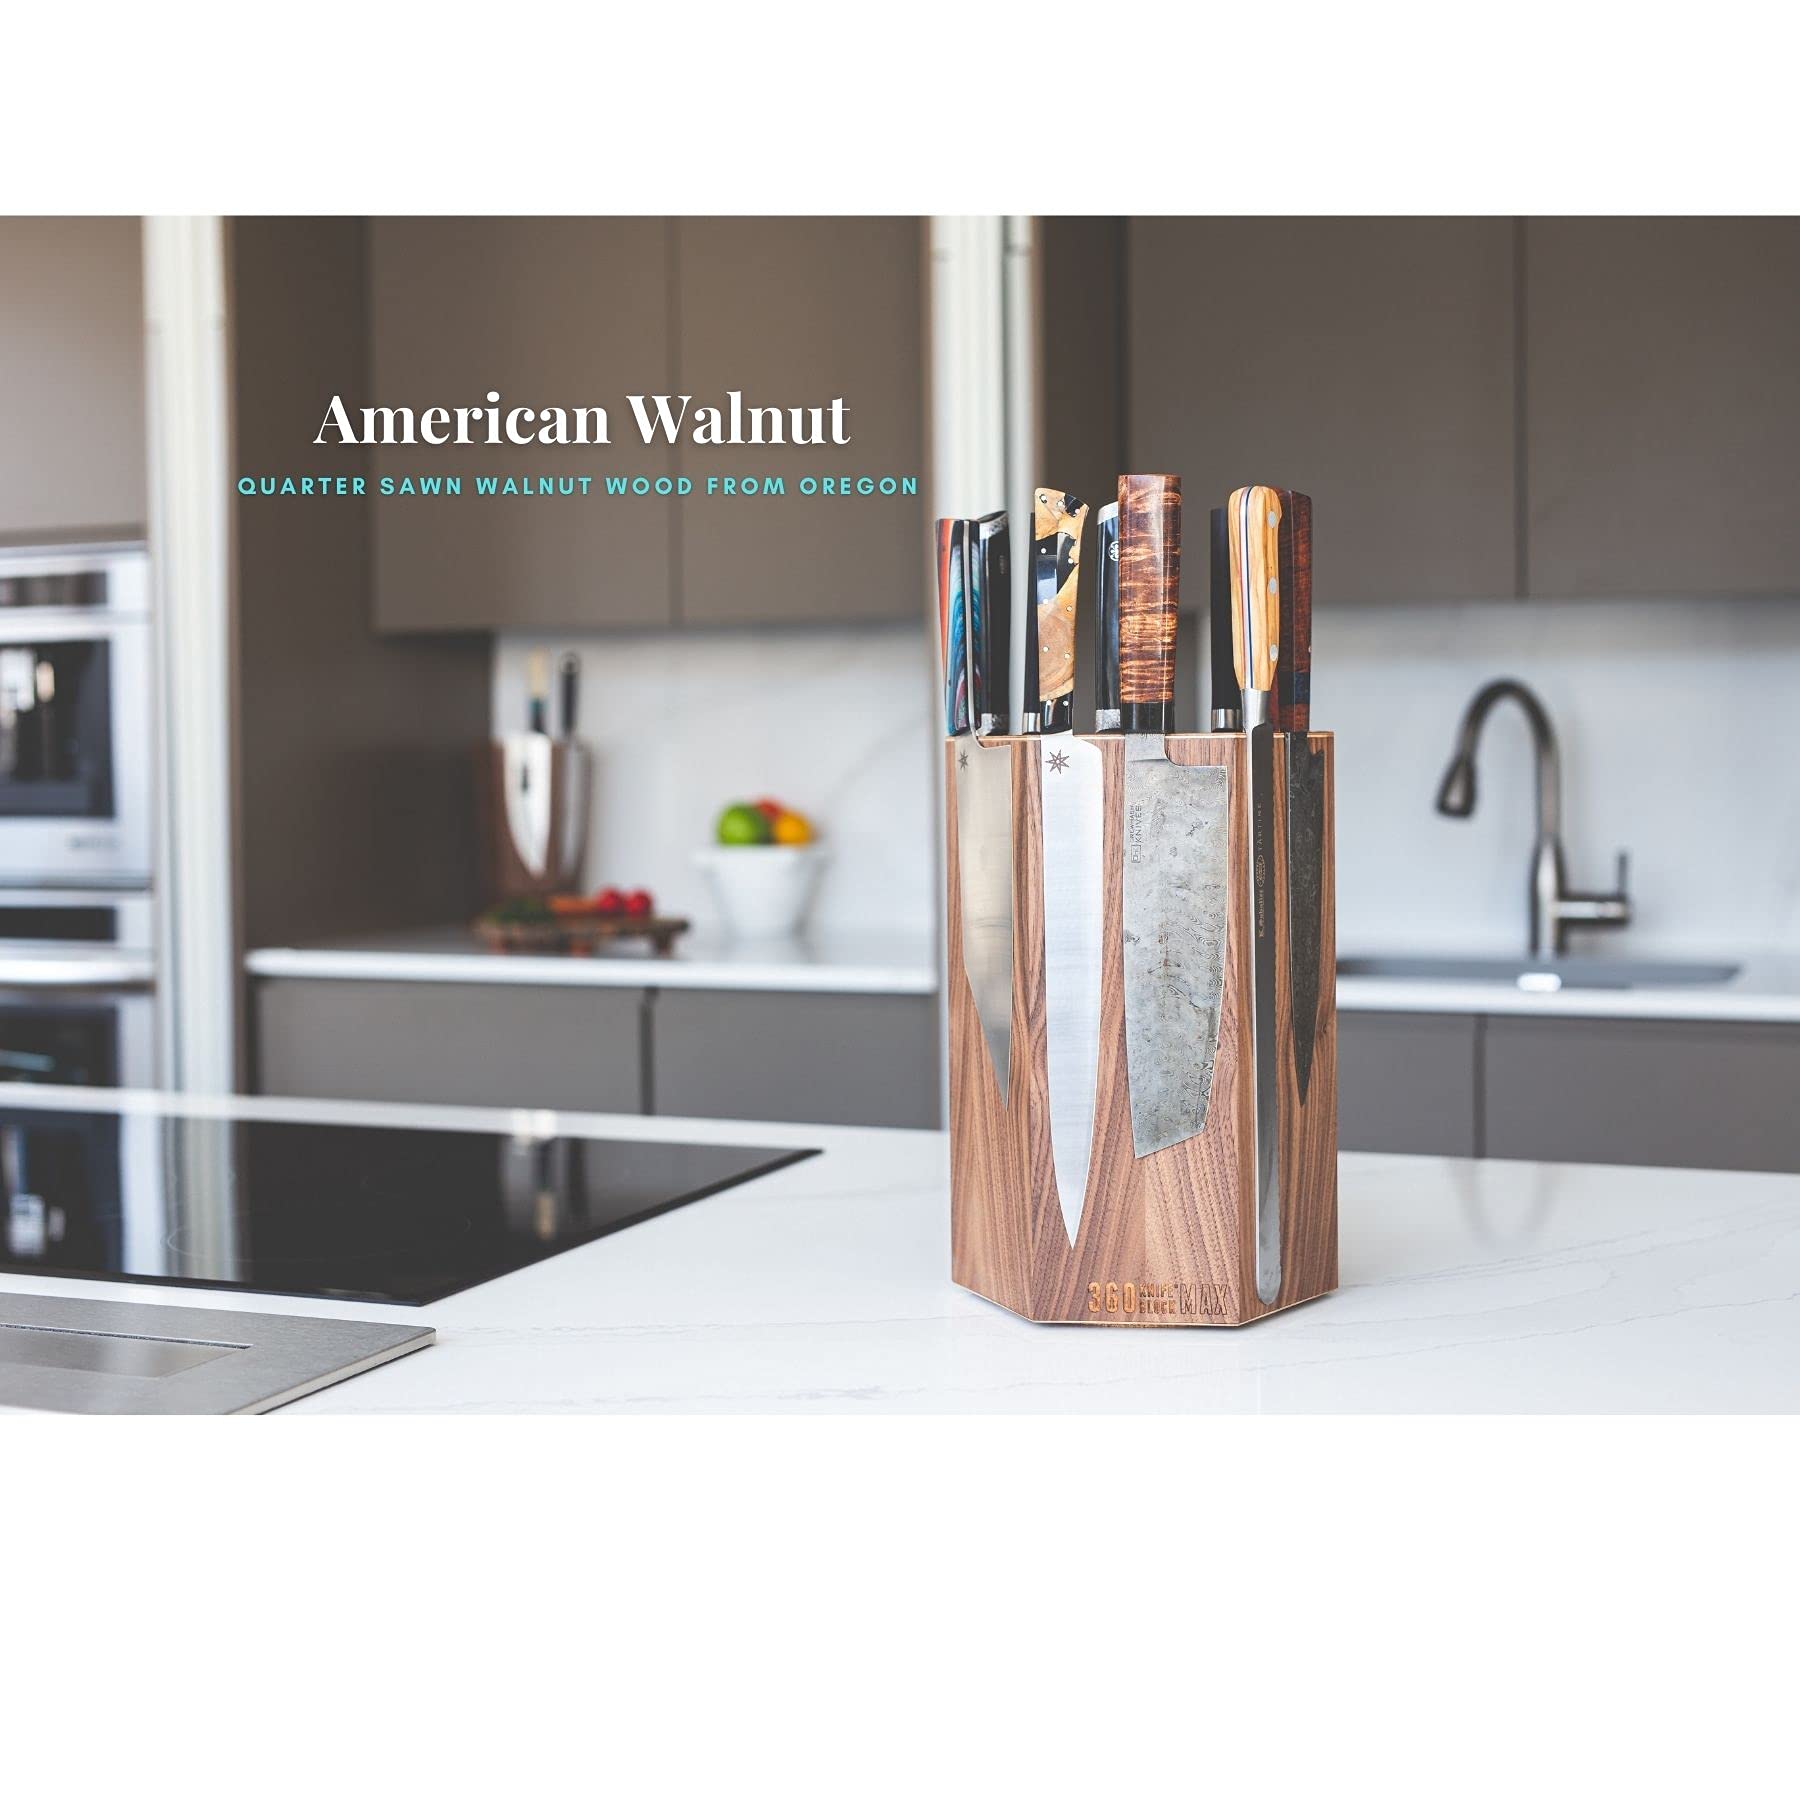 360 Knife Block MAX - (walnut) rotating, magnetic, knife block - NOW w/top slots - capacity for 20+ knives & 12" blades (Walnut wood)